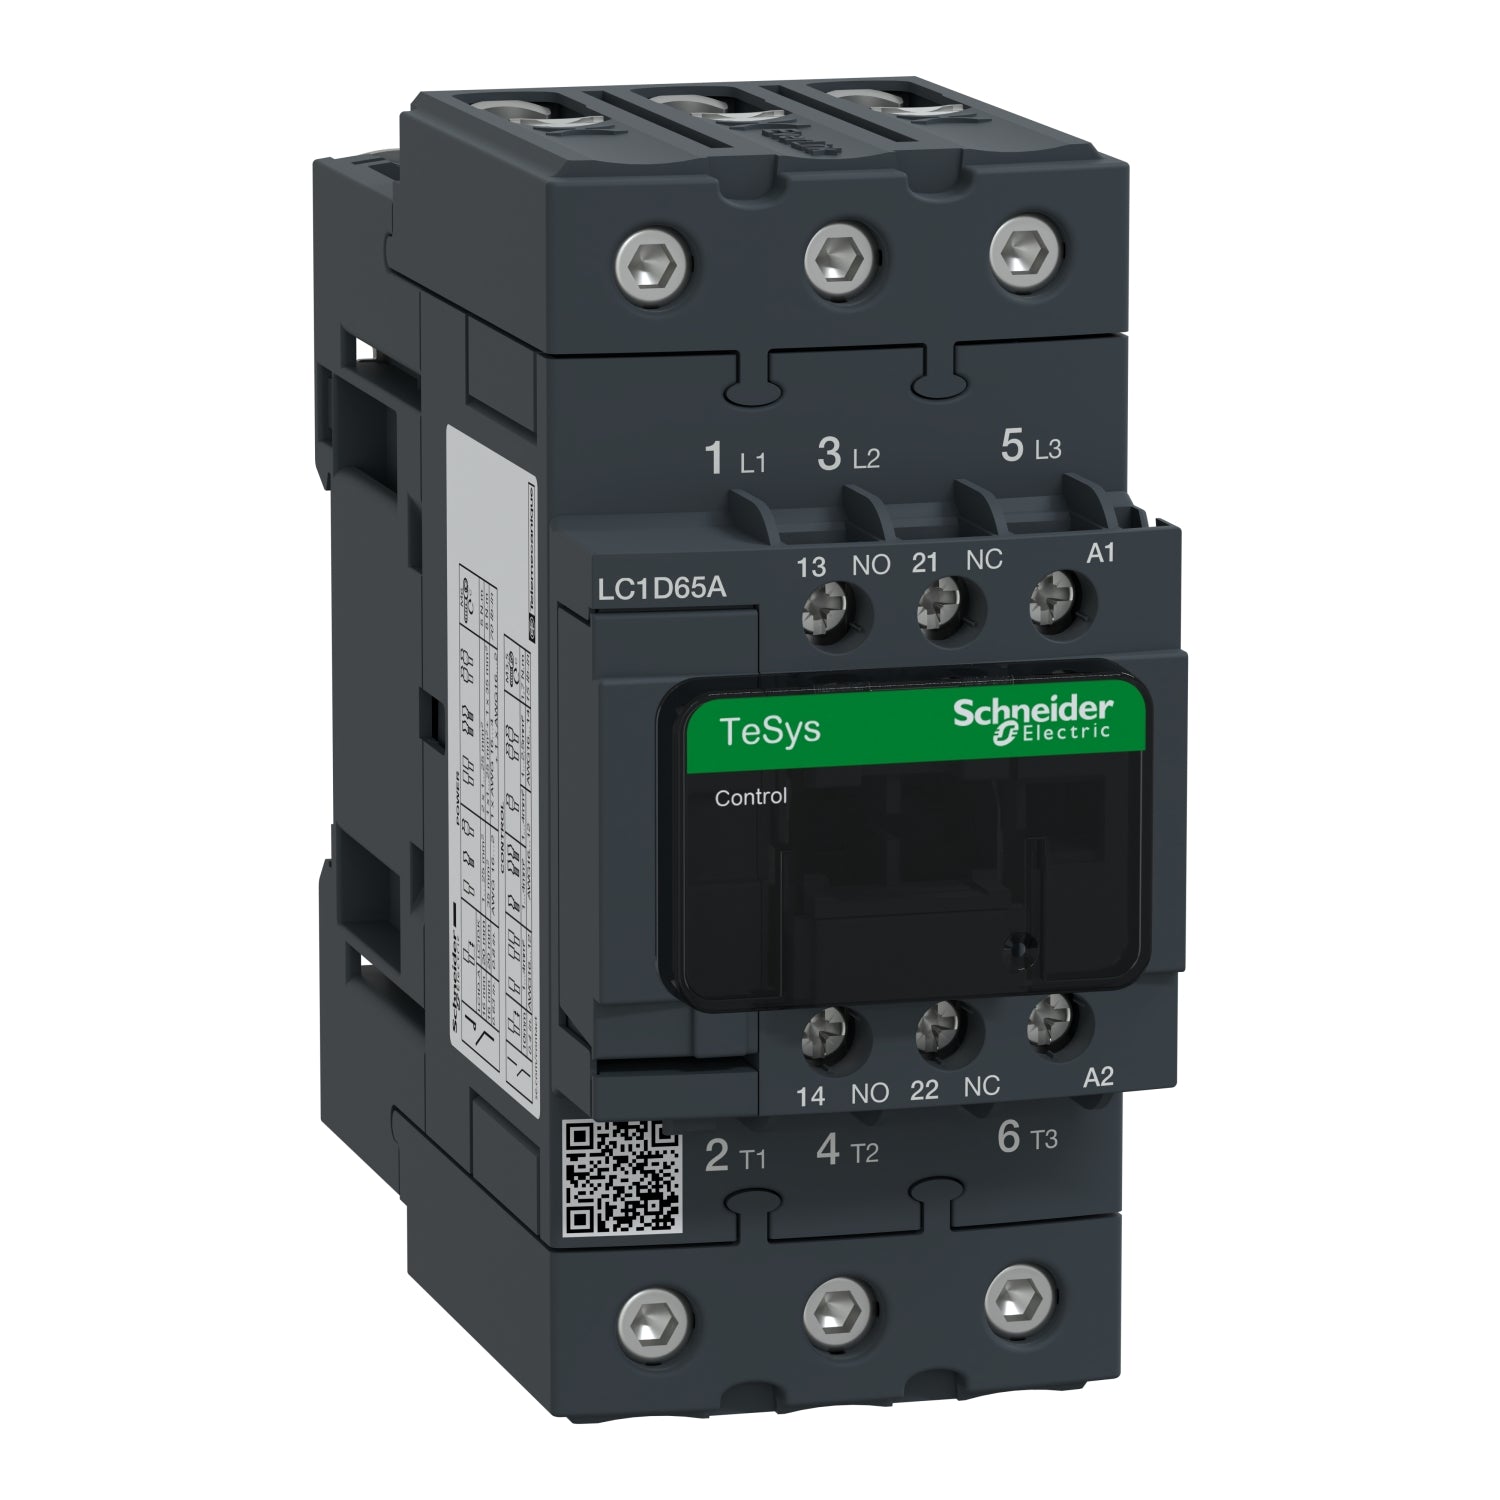 LC1D65AF7 | Schneider Electric IEC contactor, TeSys Deca, nonreversing, 65A, 40HP at 480VAC, up to 100kA SCCR, 3 phase, 3 NO, 110VAC 50/60Hz coil, open